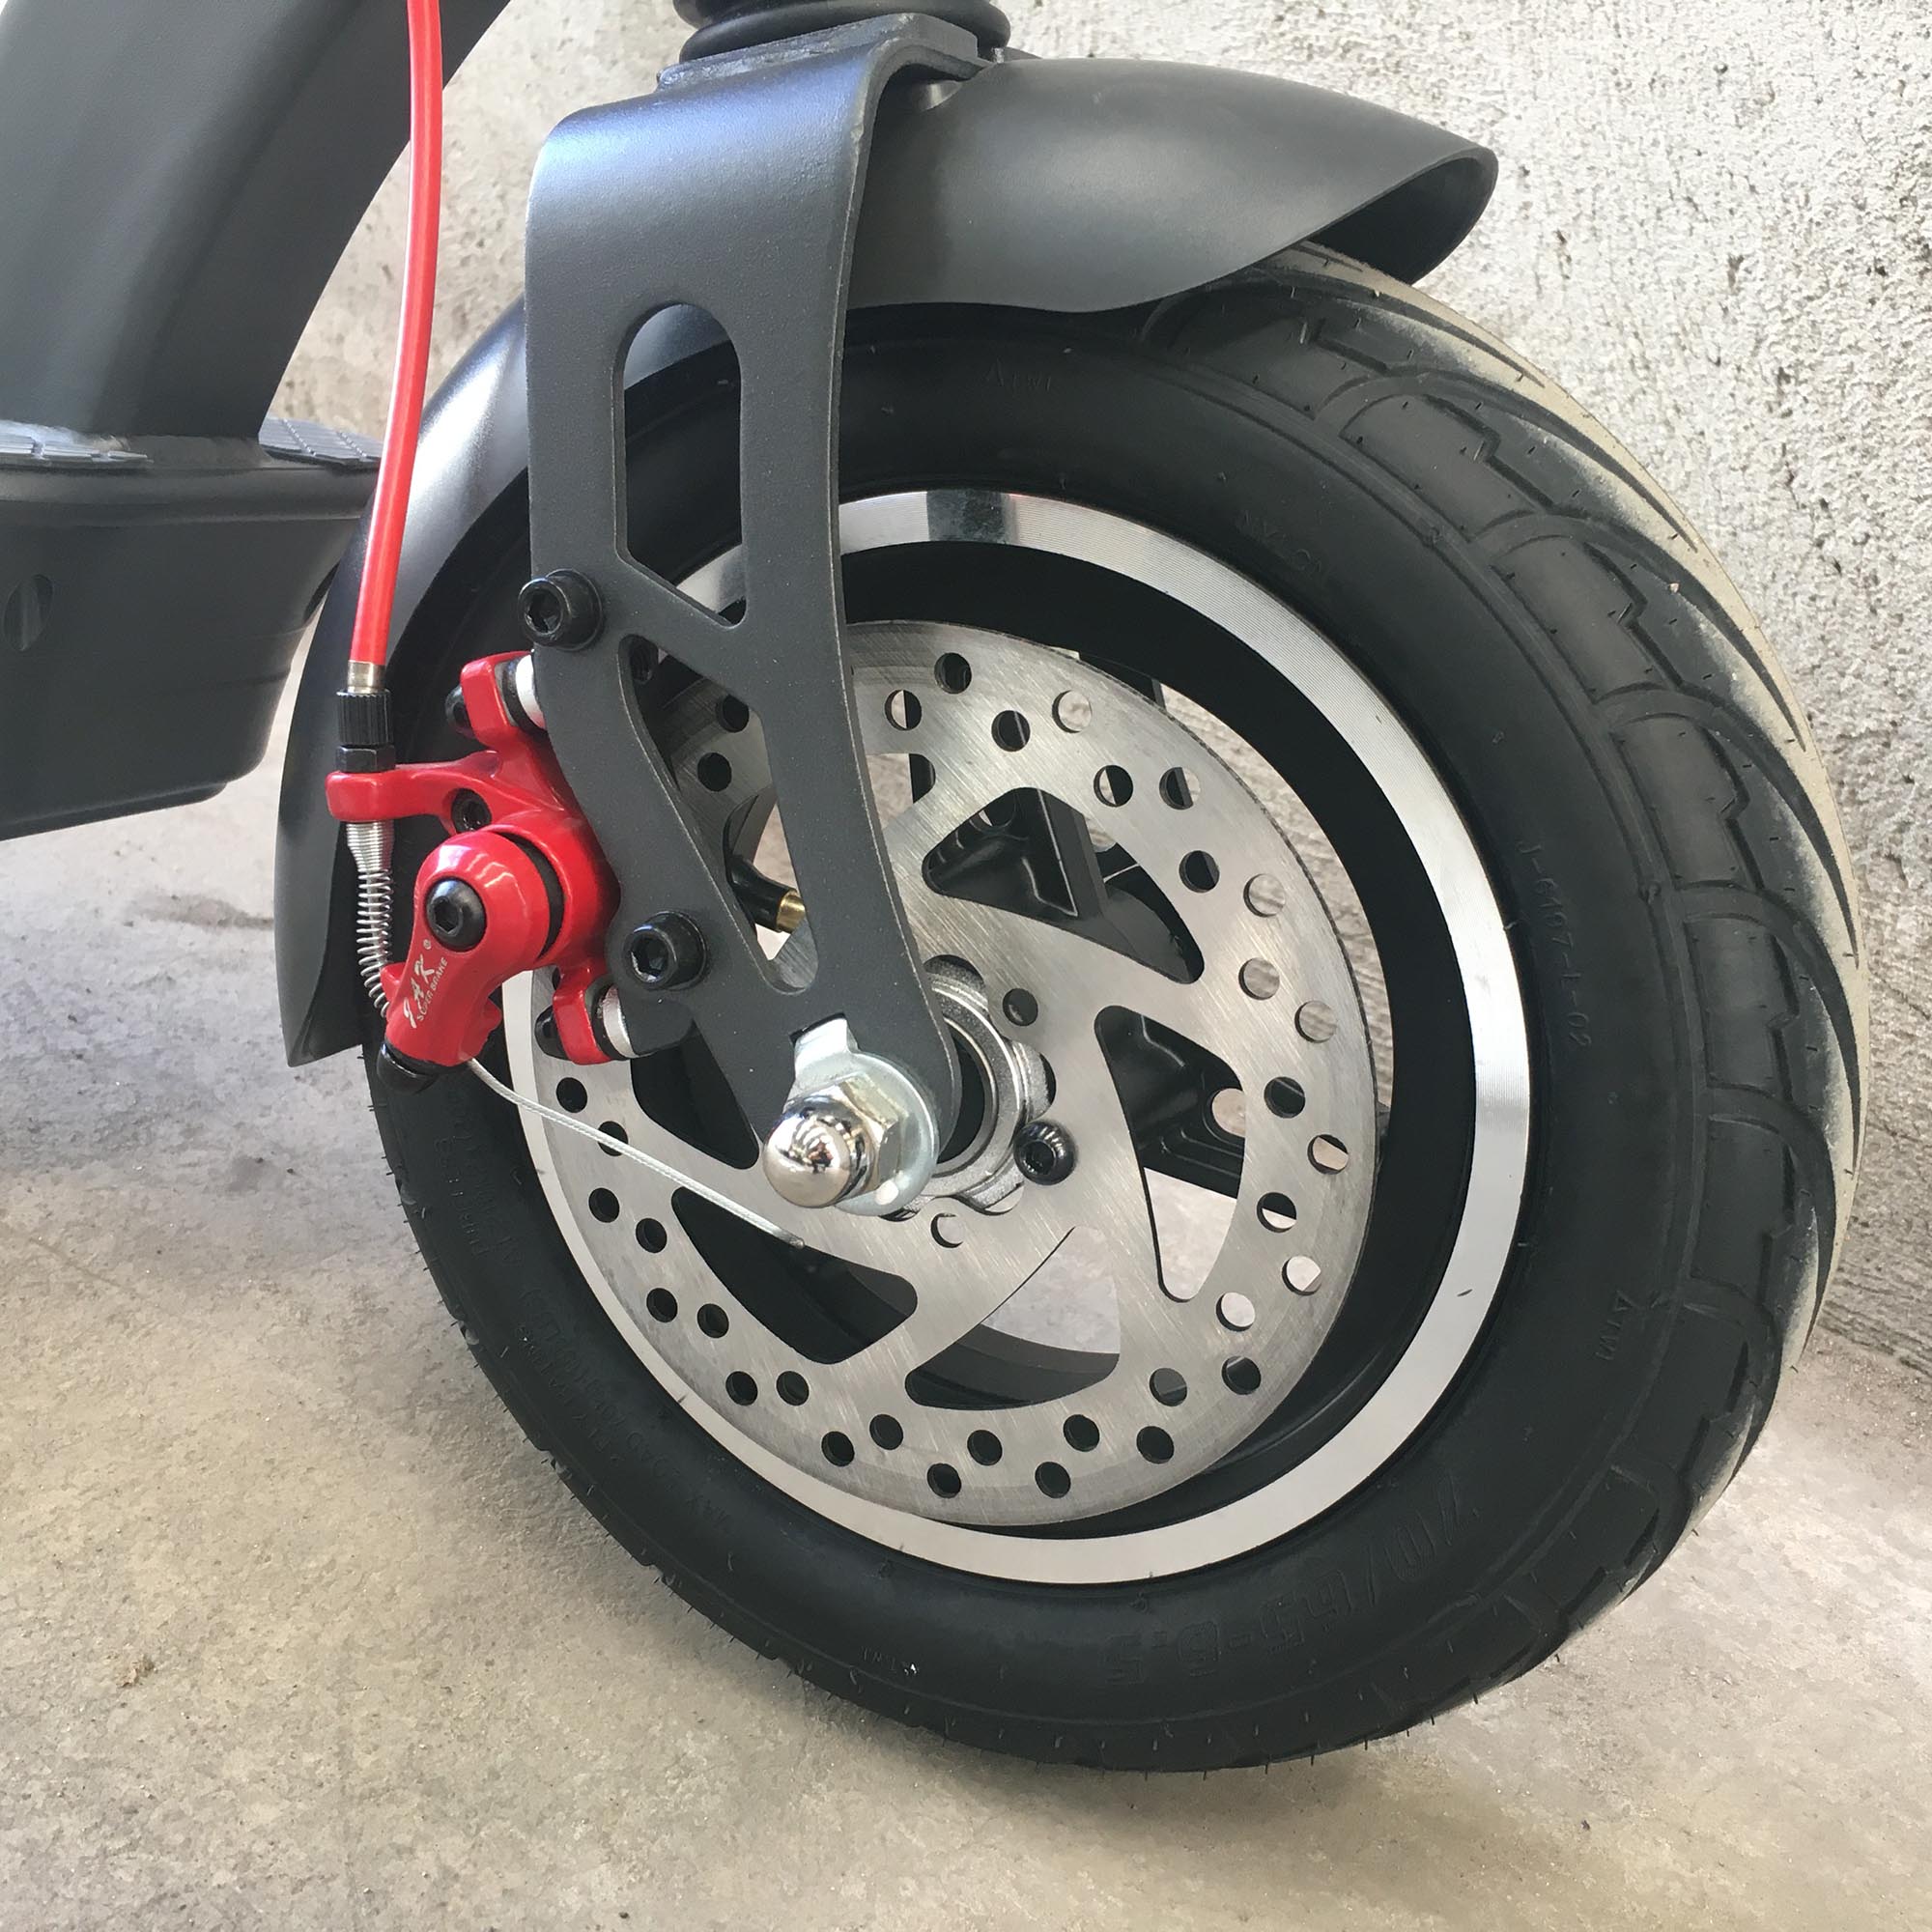 Aerlang Electric scooter 10 inch wheel tubeless tire